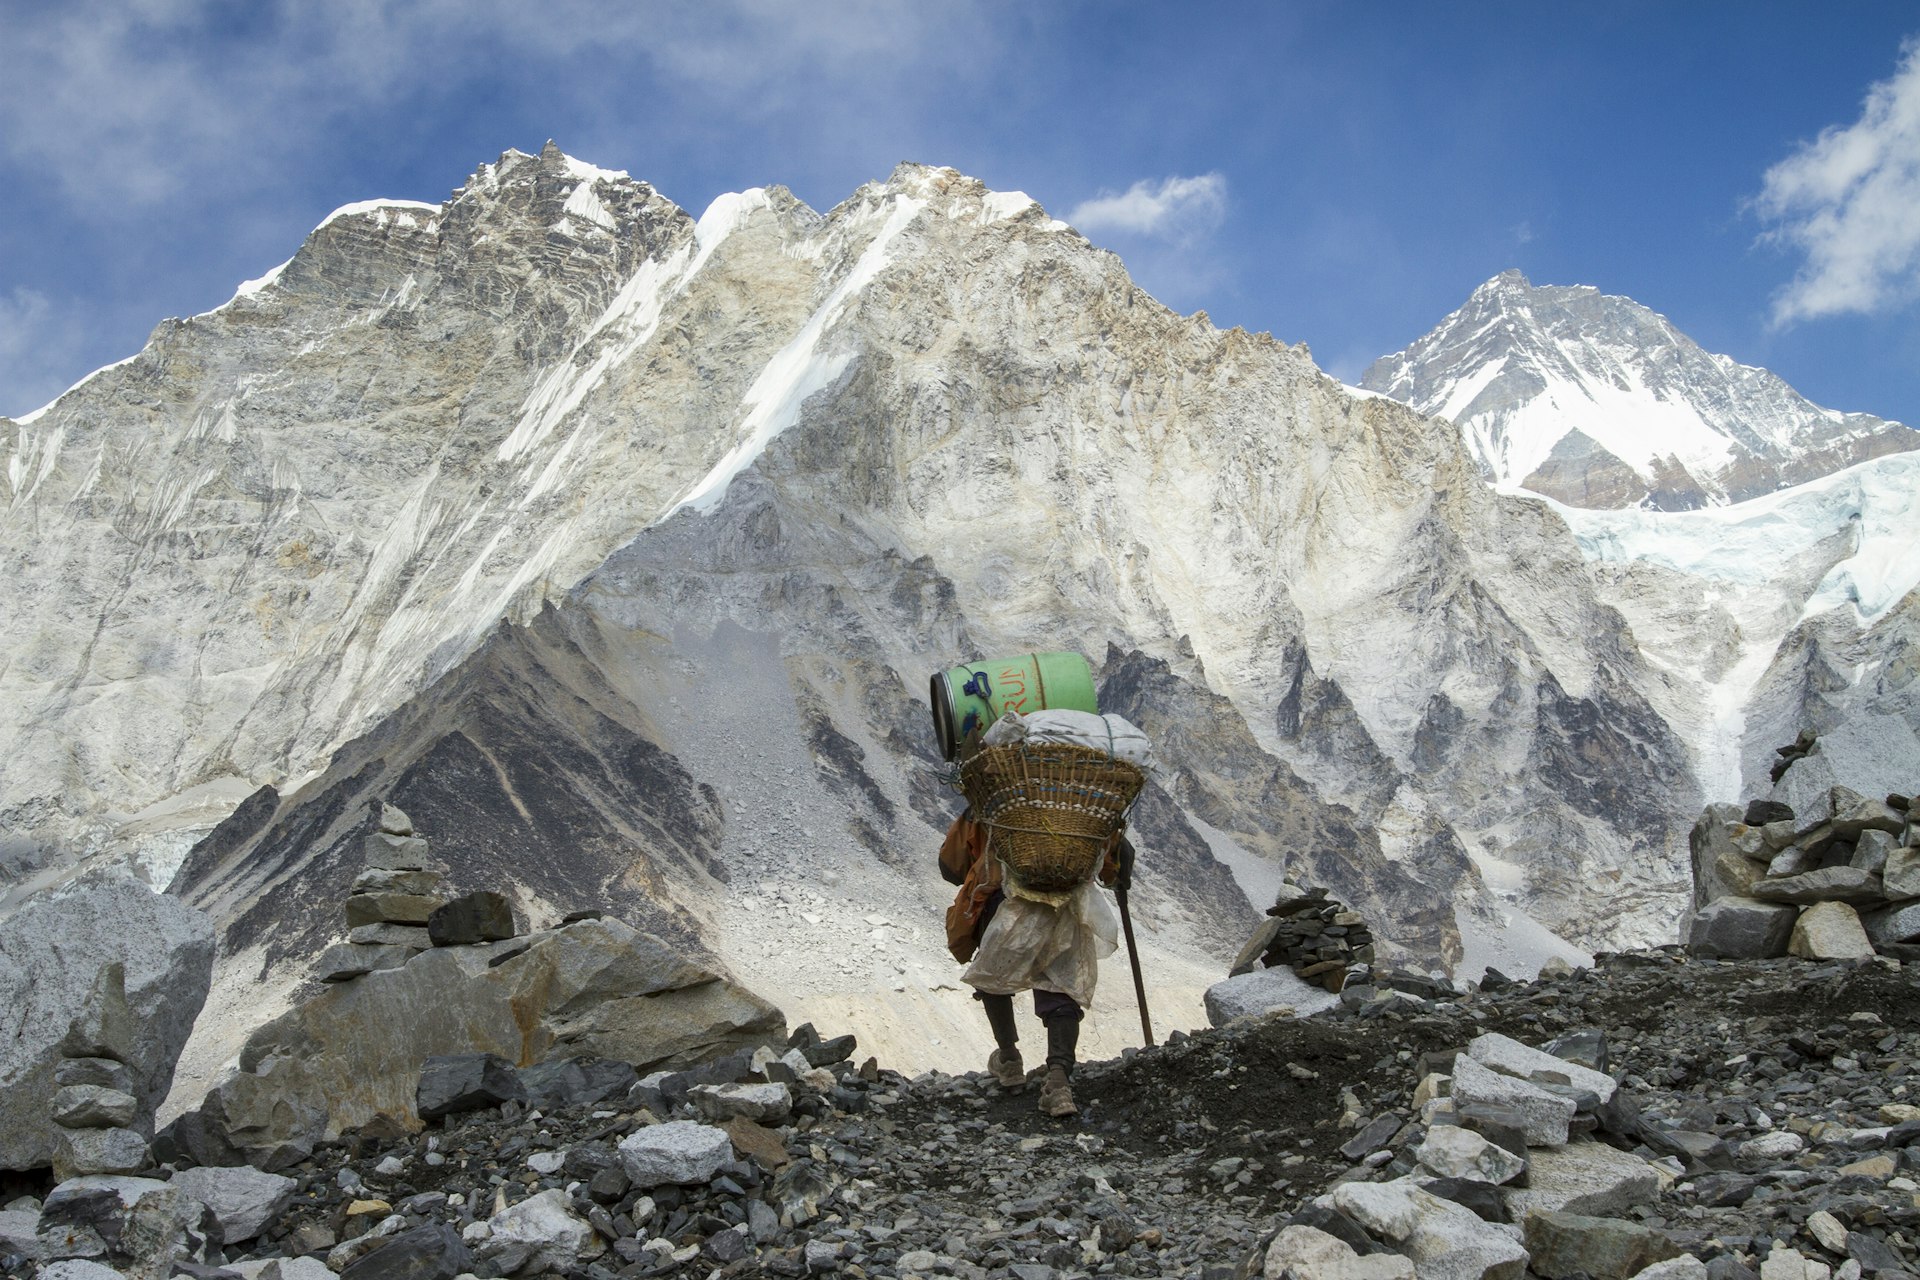 Features - Porter at Mount Everest Base Camp